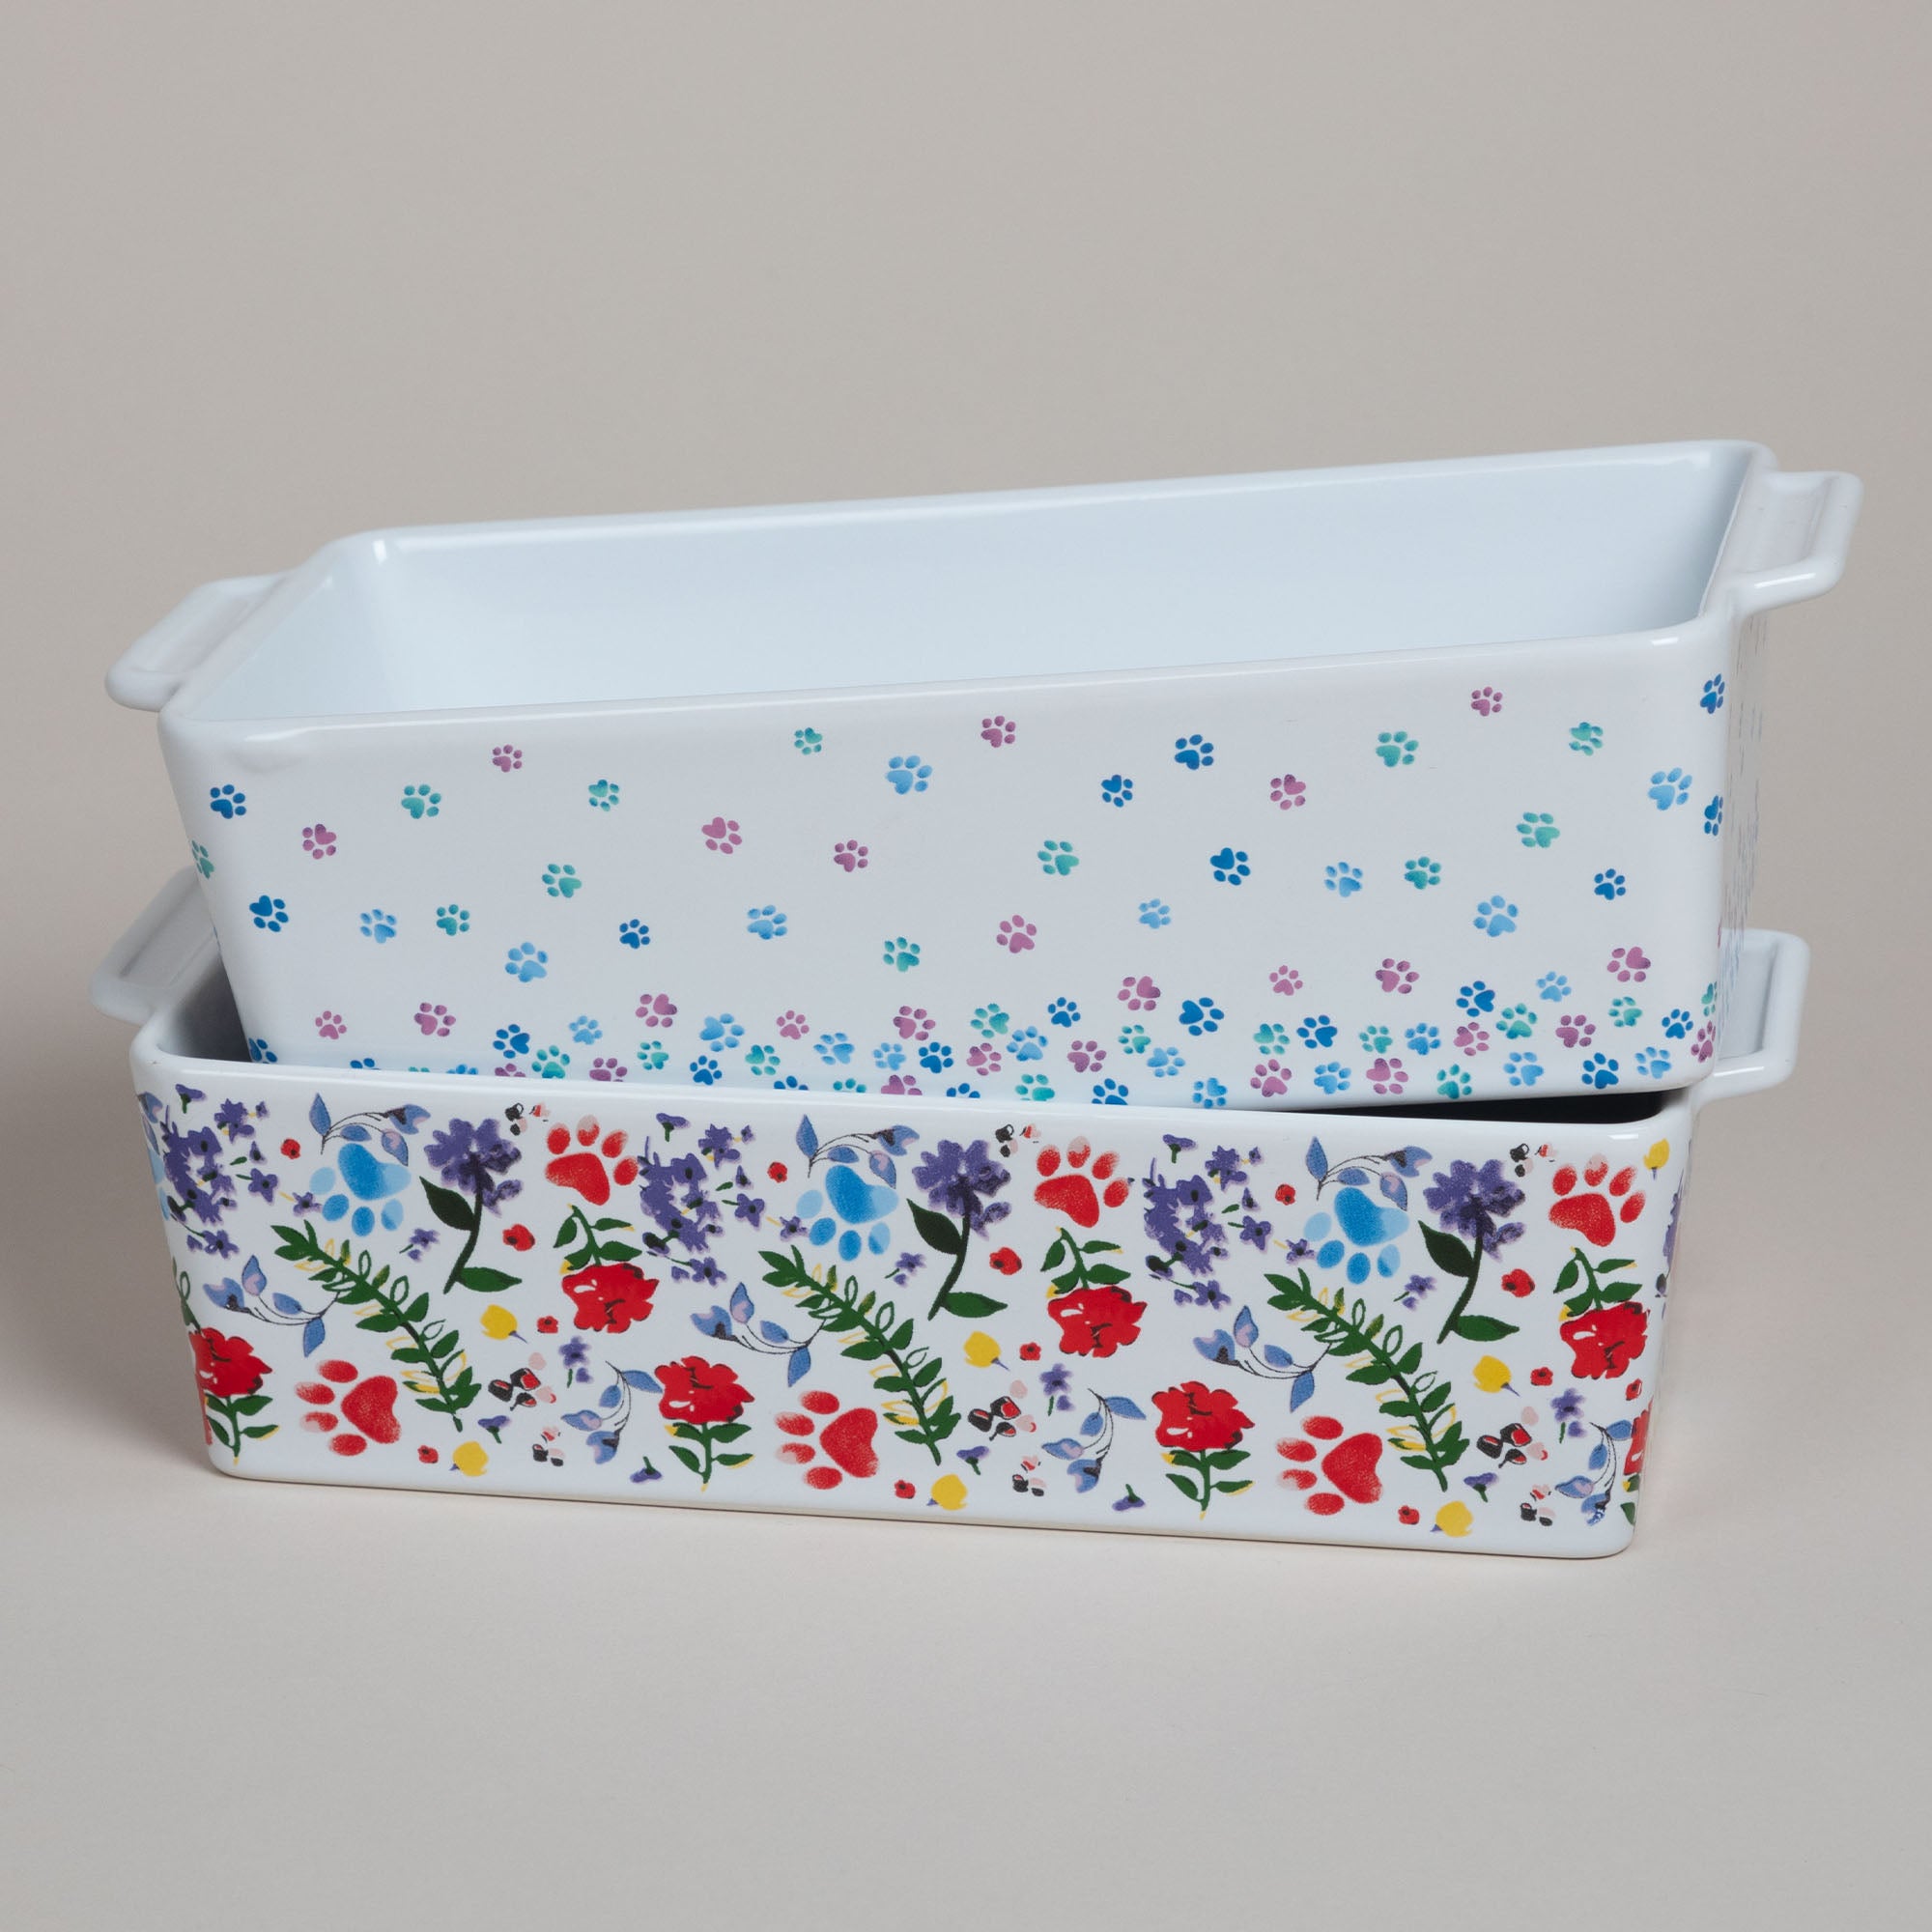 Made With Love Paw Print Ceramic Loaf Pan - Tumbling Paws